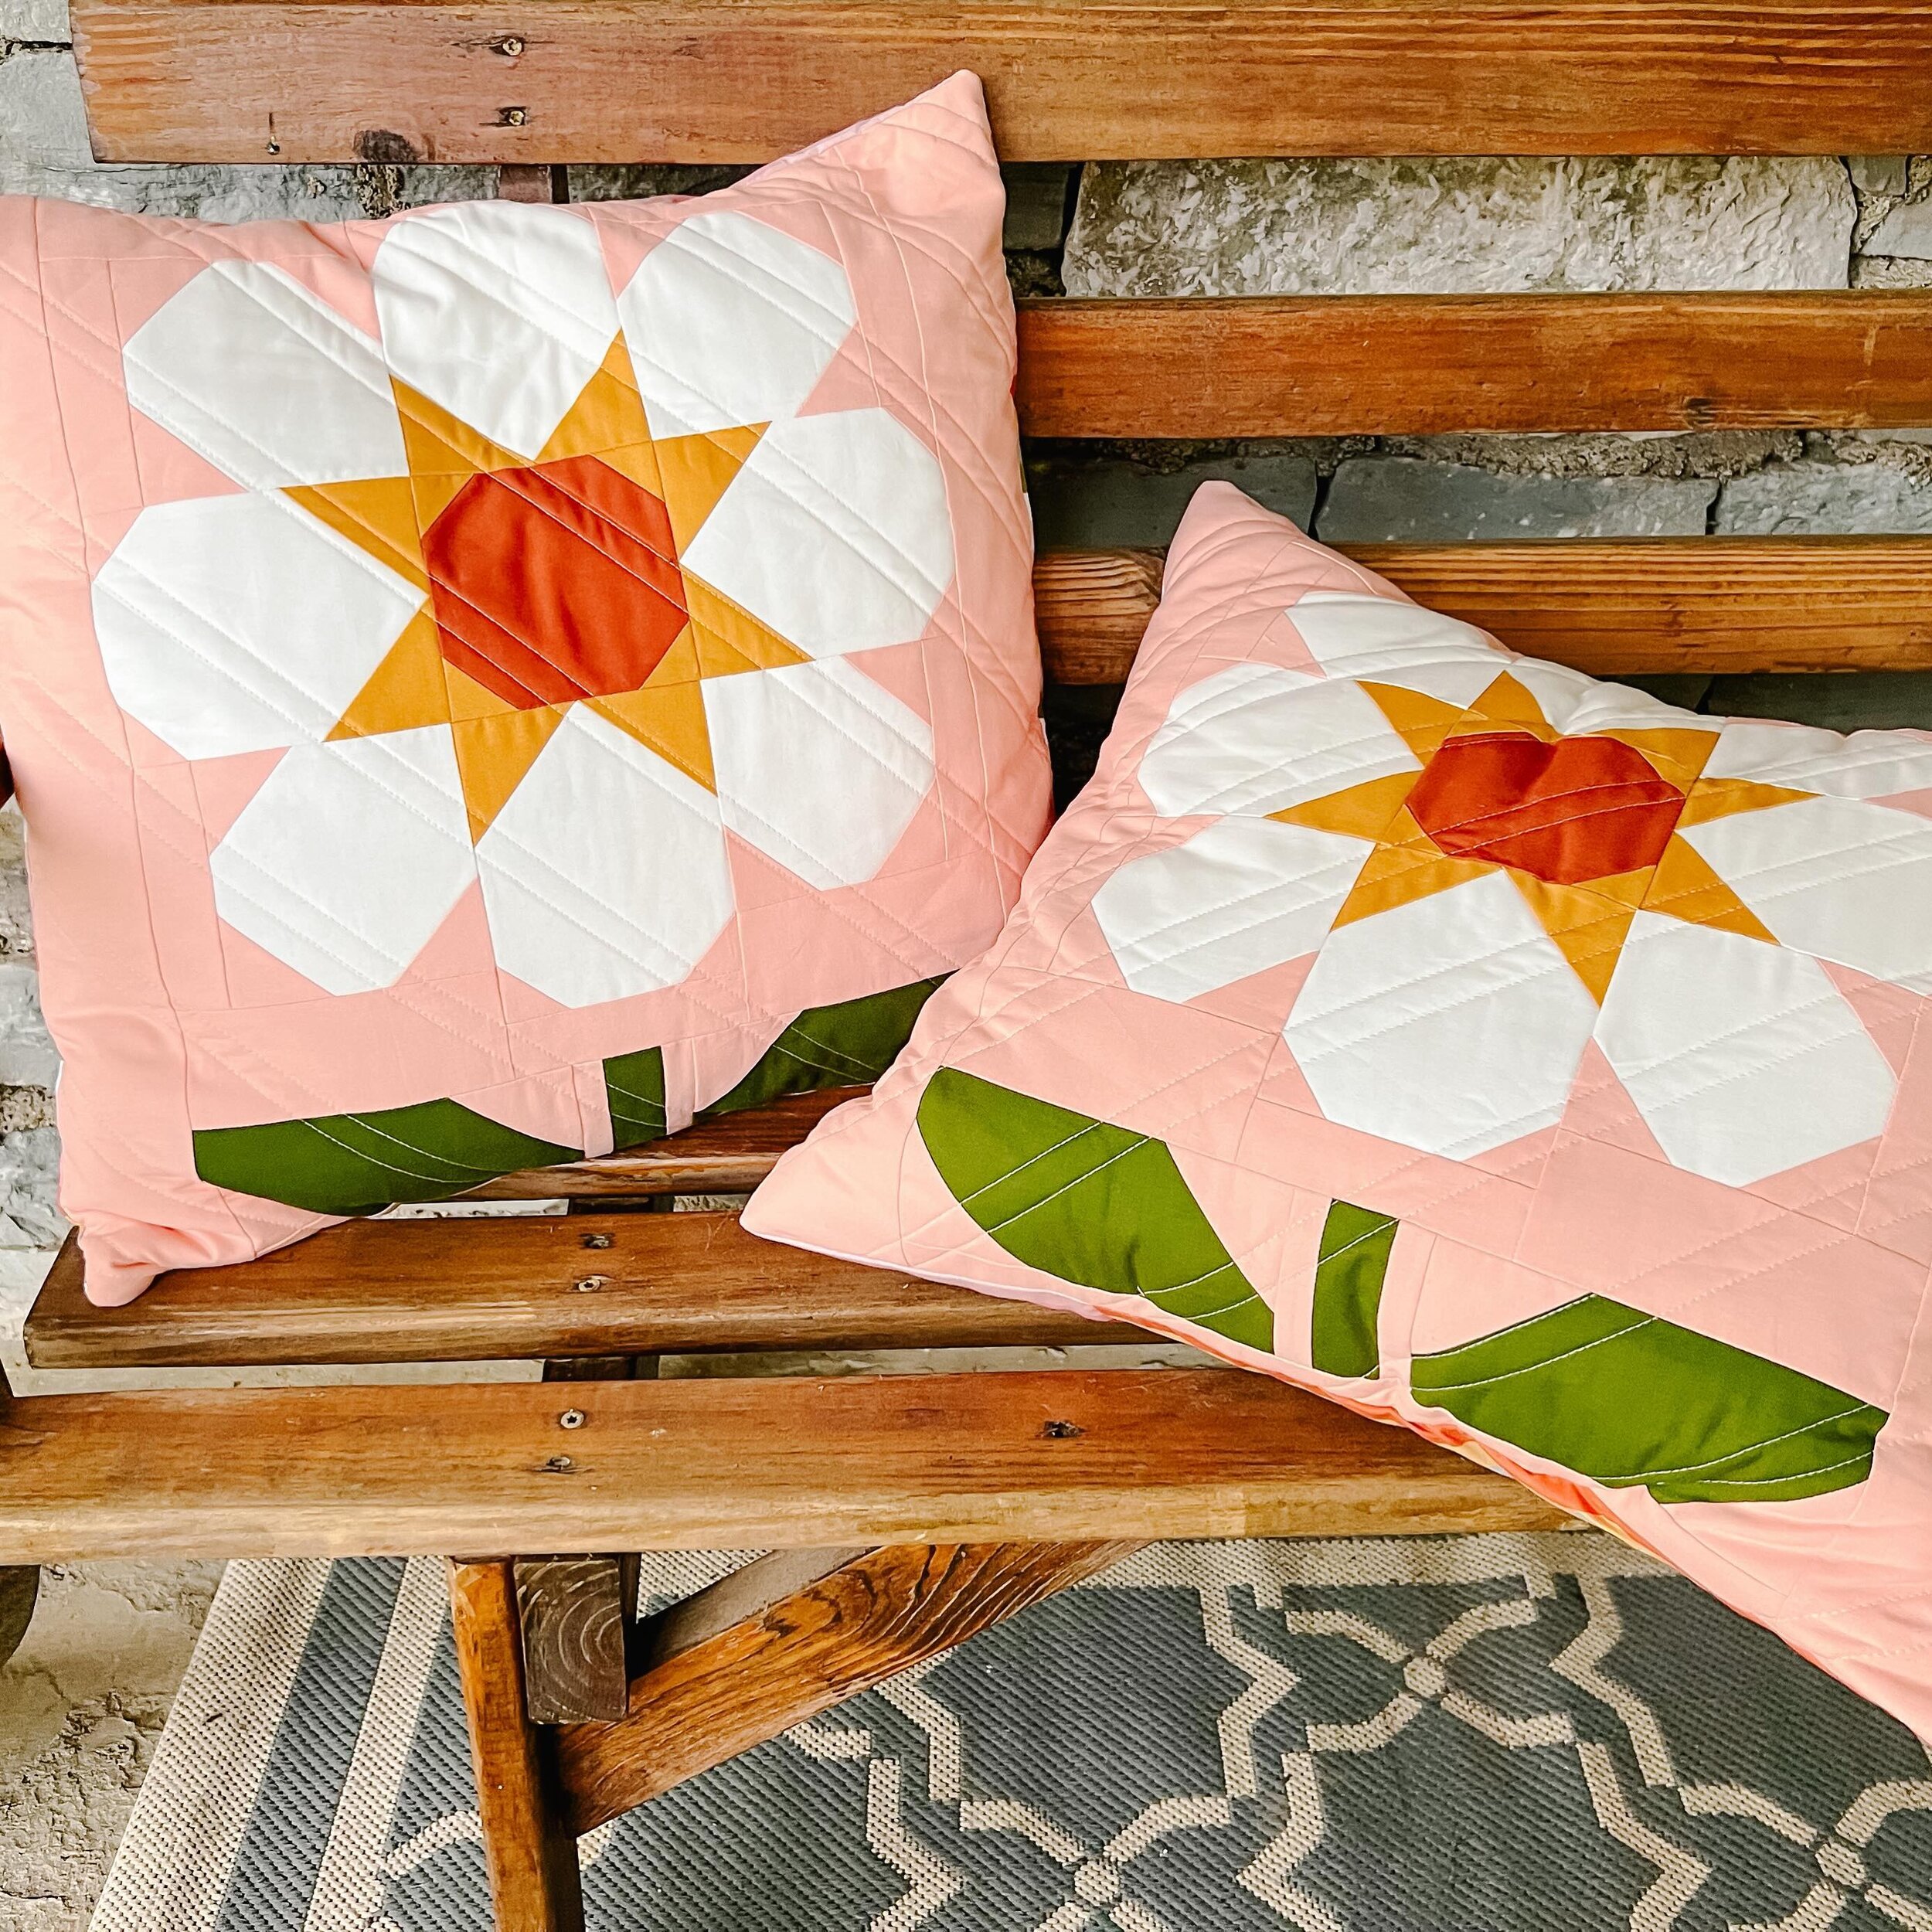 Daisy Mae is here! 

And these happy pillows are perfect to brighten the gloomy, cloudy day we are having. TN is experiencing one of our &ldquo;little winters&rdquo; currently with cloudy skies, wind and cooler temps. These are luckily 2 flowers I wo